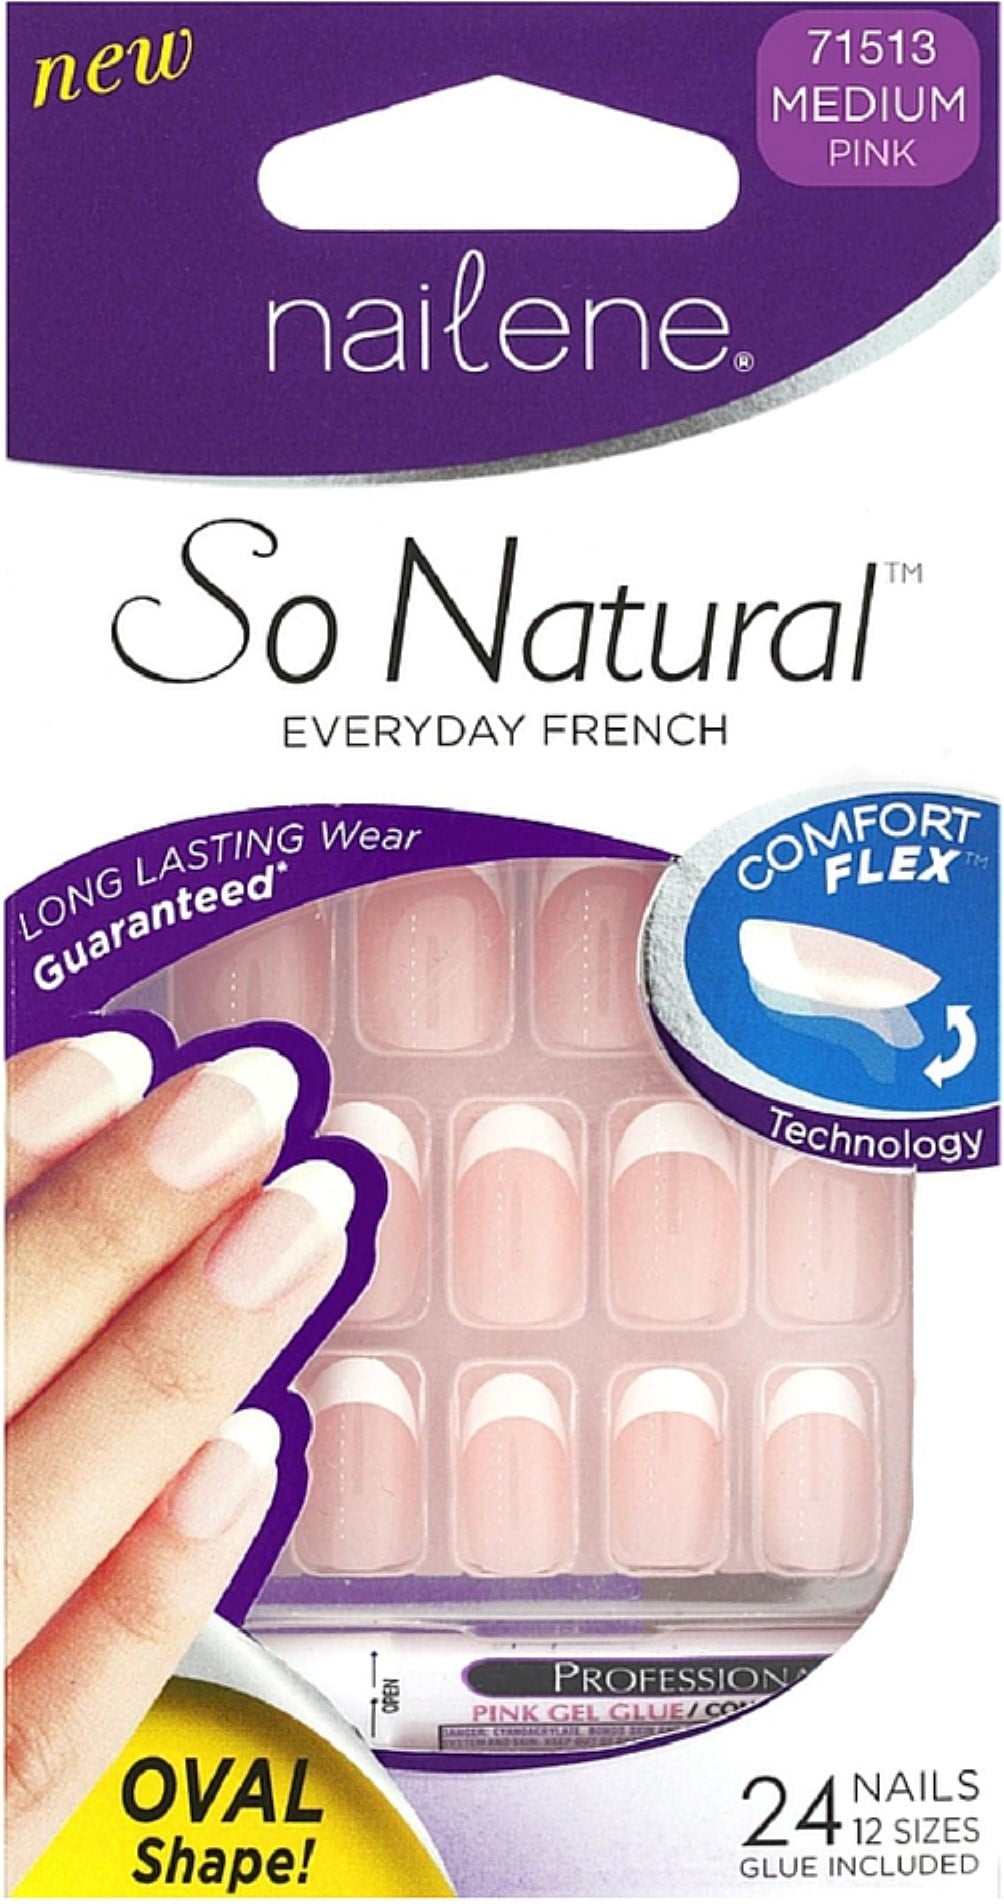 Nailene So Natural Everyday French, Medium Pink [71513] 24 ea (Pack of